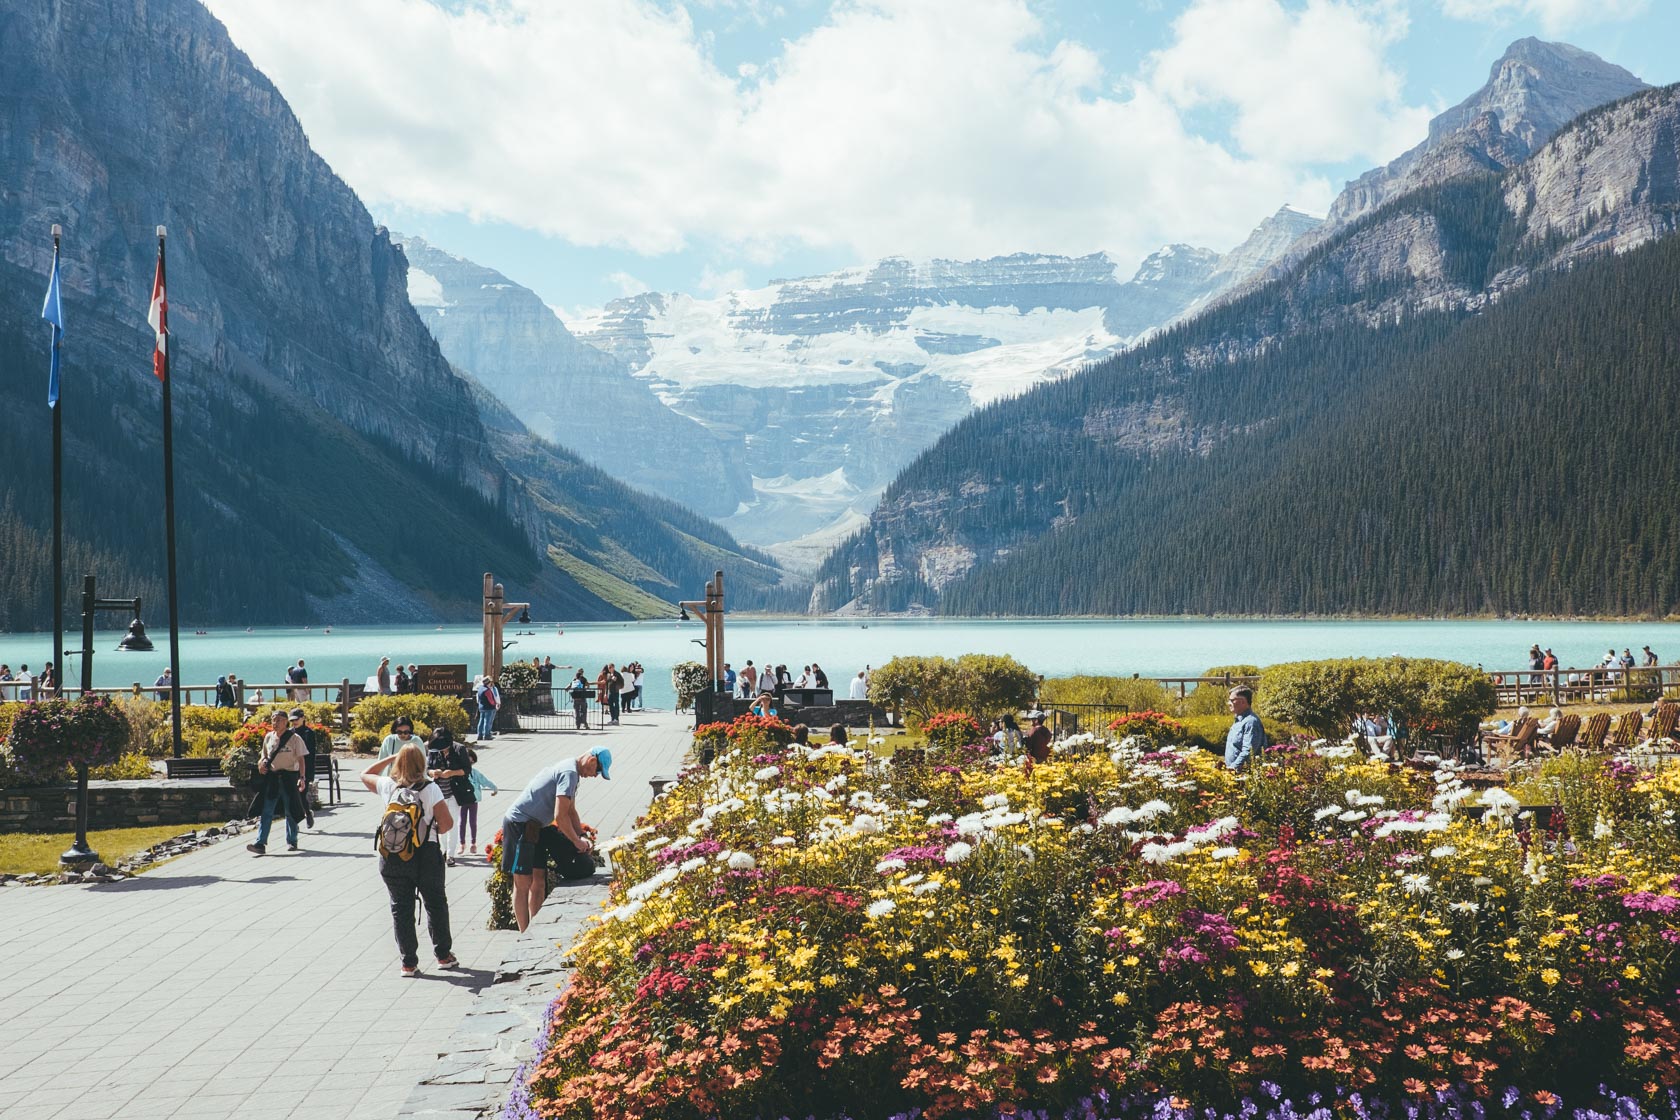 Where to stay in Banff: Lake Louise